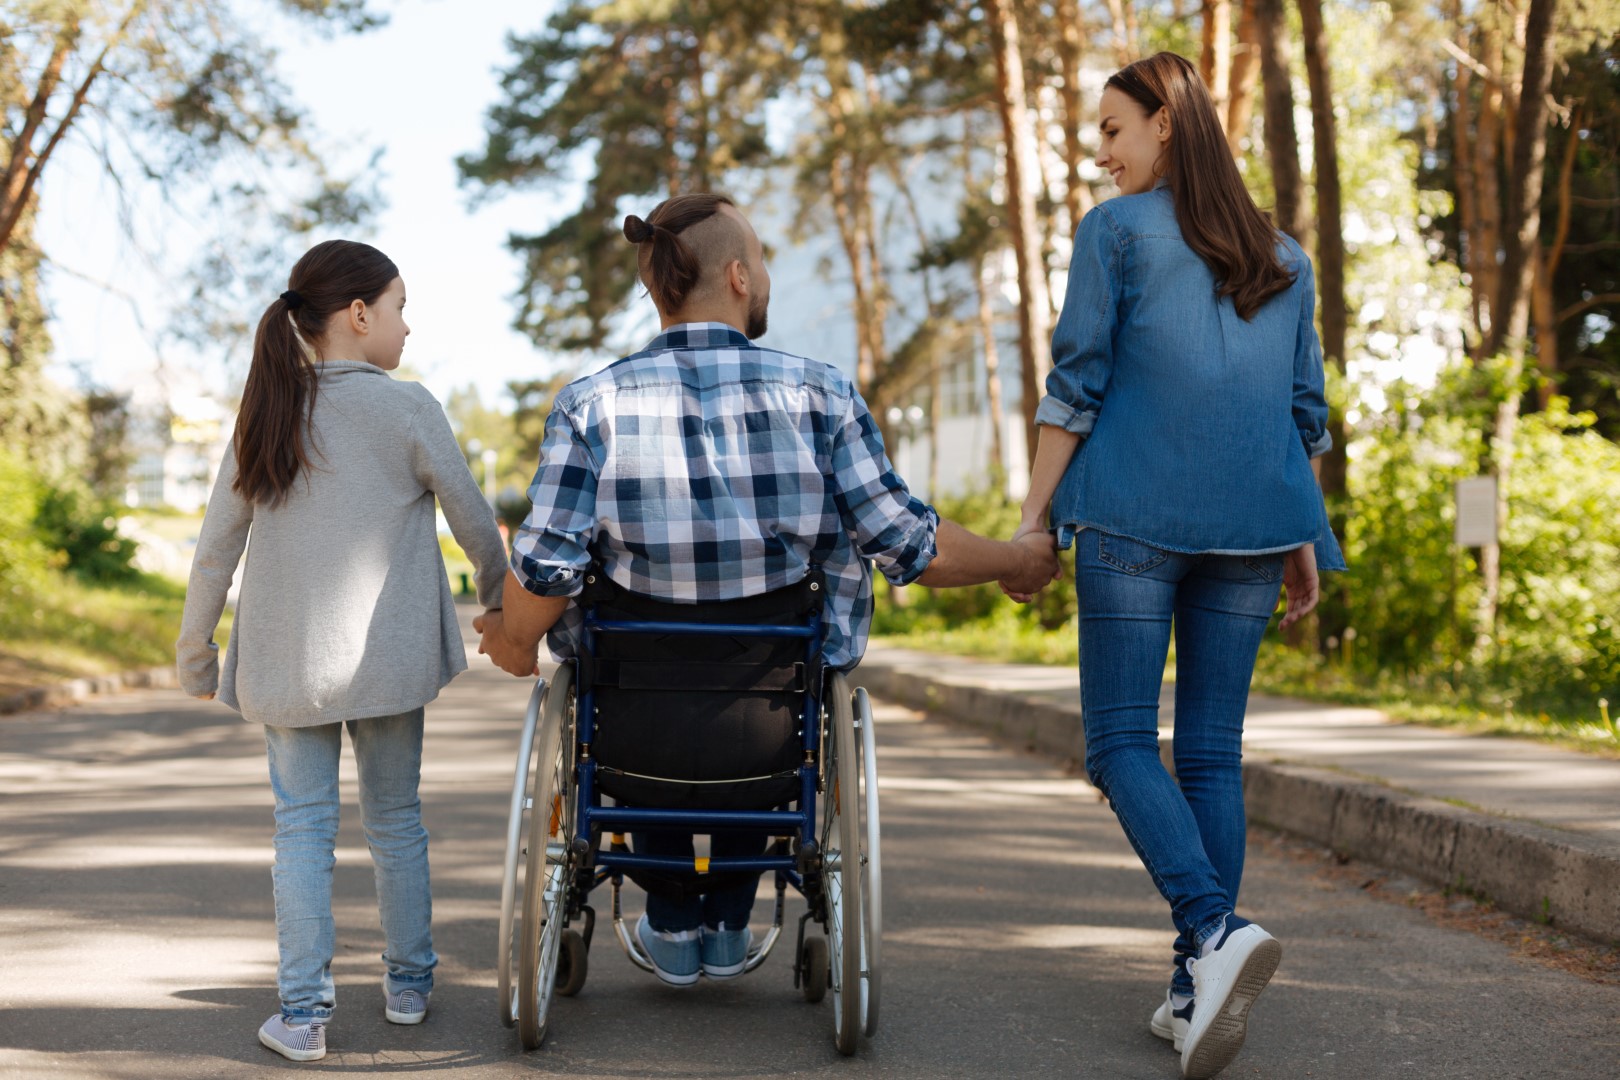 Two adults, one walking and one in a wheelchair holding hands with a young child